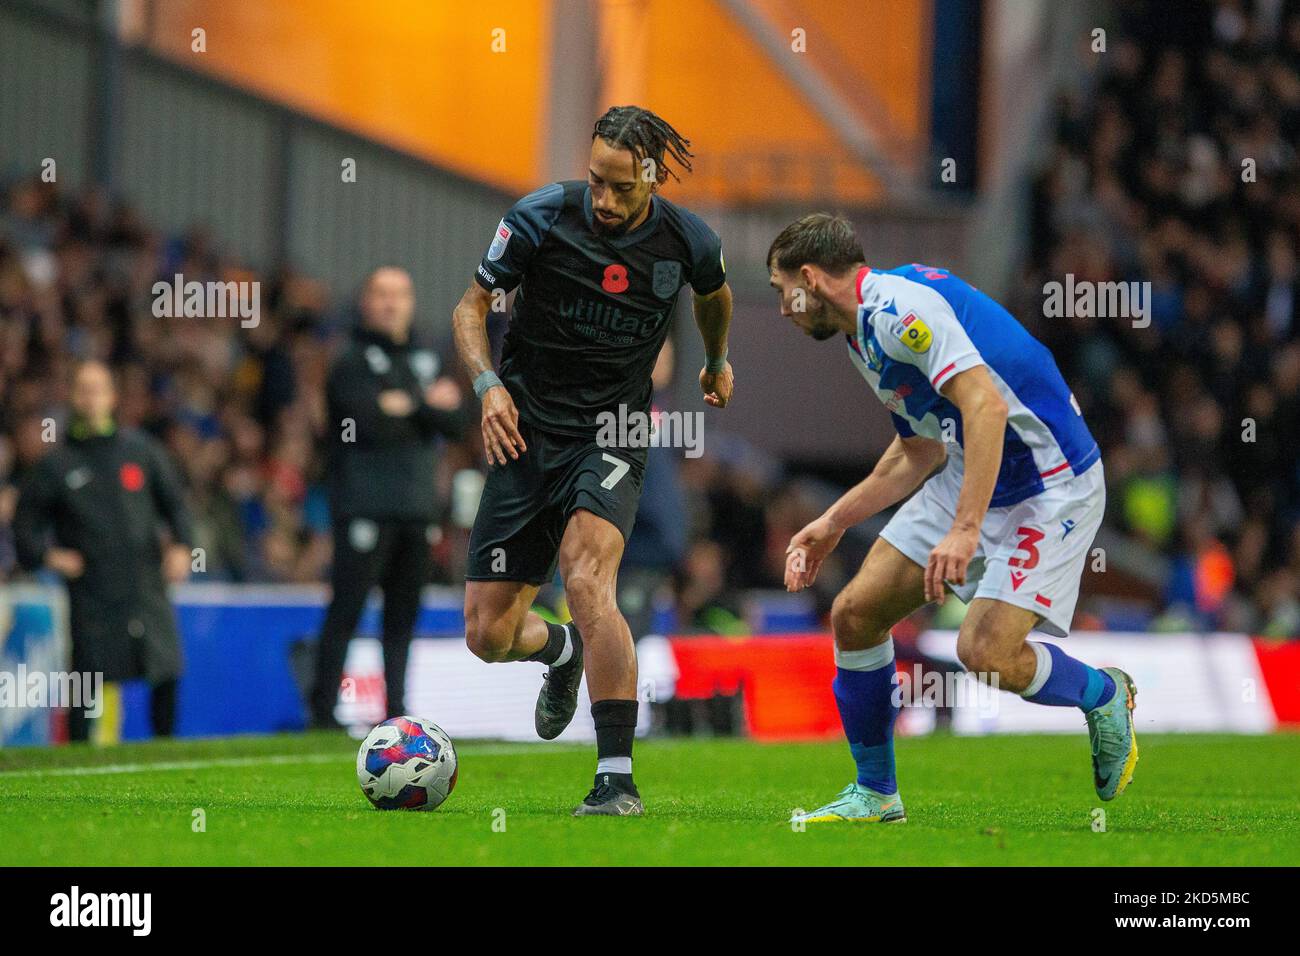 Sorba Thomas #7 of Huddersfield Town in possession during the Sky Bet Championship match Blackburn Rovers vs Huddersfield Town at Ewood Park, Blackburn, United Kingdom, 5th November 2022  (Photo by Phil Bryan/News Images) Stock Photo